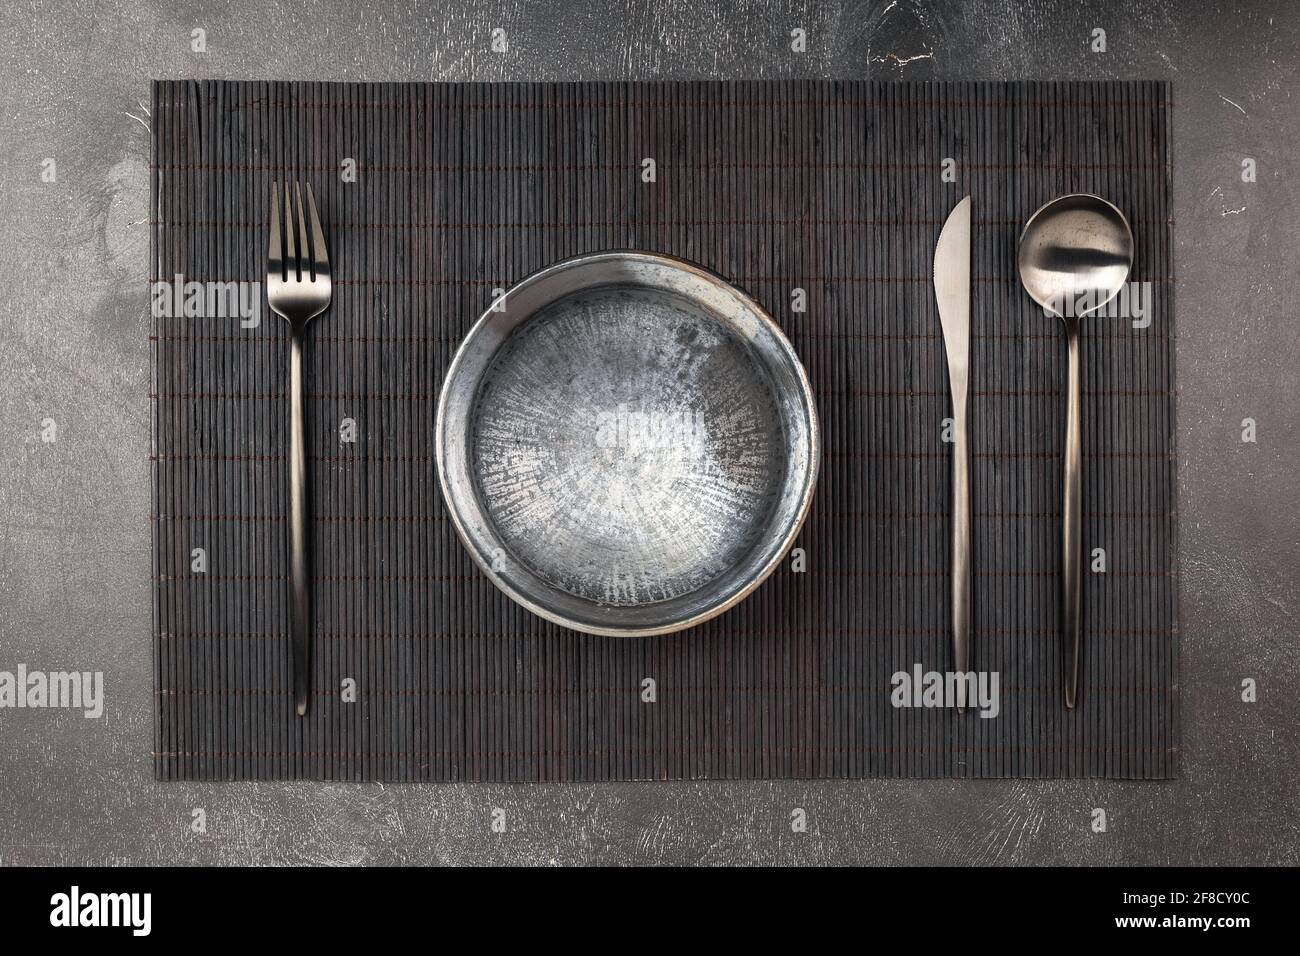 Empty black clay plate and sblack metal silverware set on wooden table Stock Photo